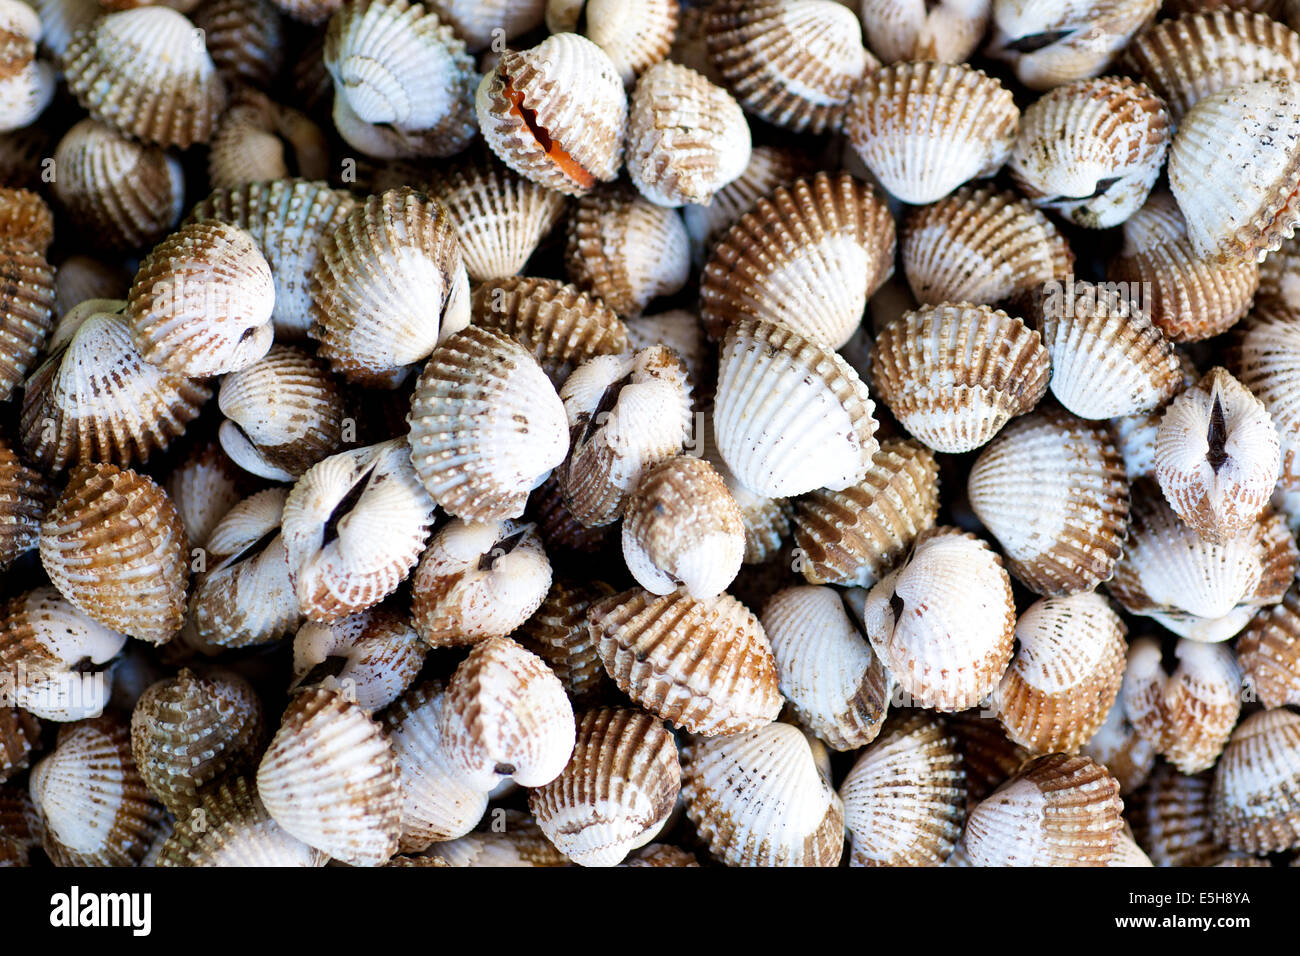 Raw Clams in the fish market in Ho Chi Minh CIty in Vietnam Stock Photo